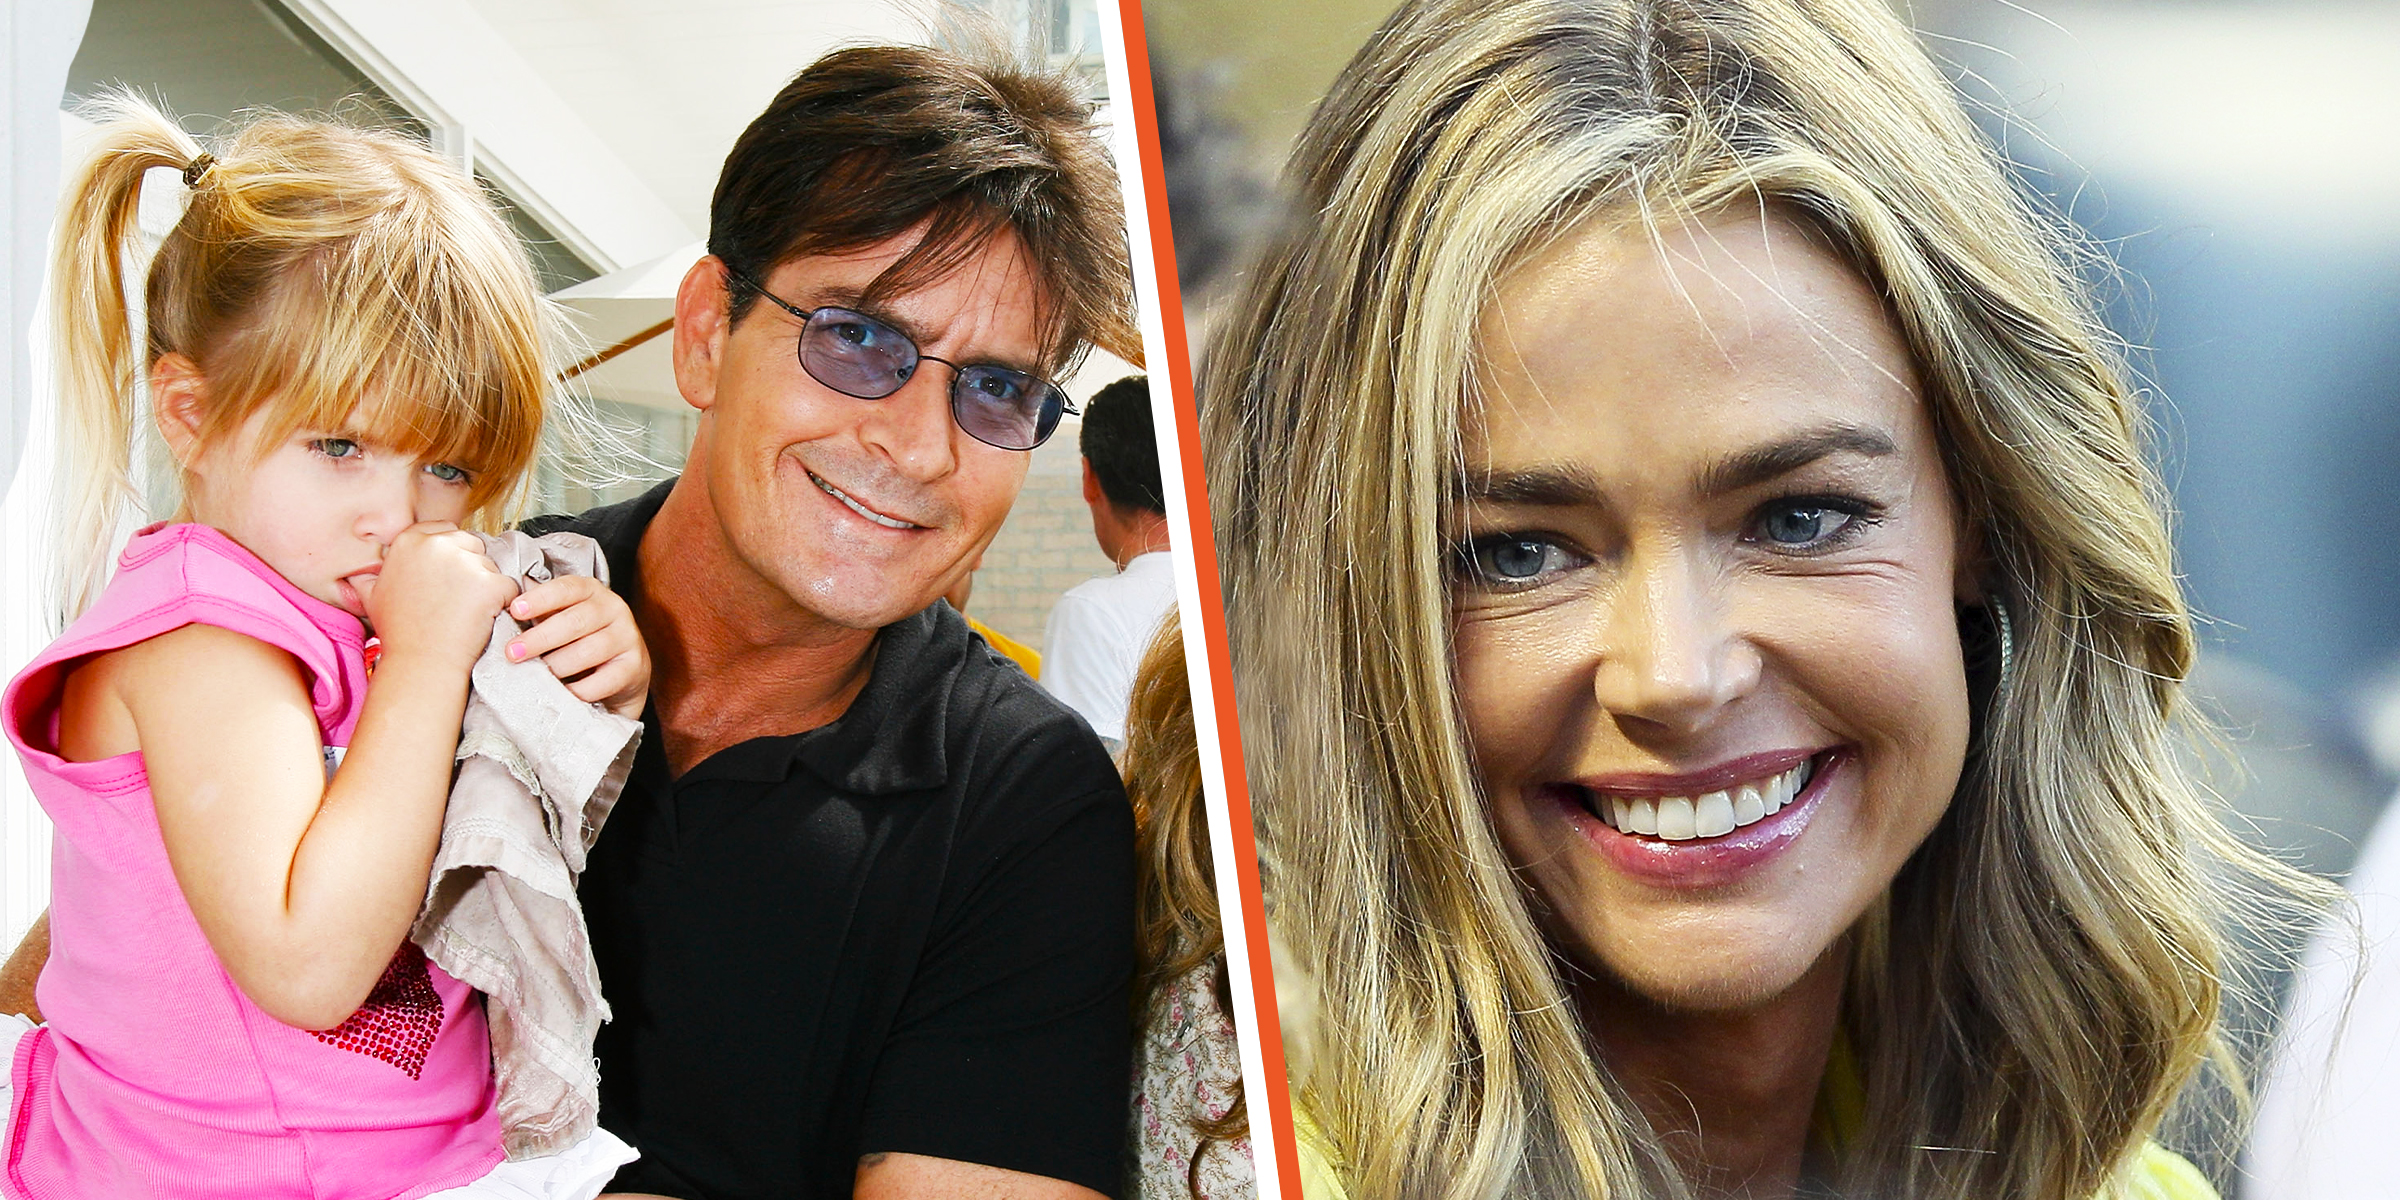 Sami Sheen and Charlie Sheen | Denise Richards | Source: Getty Images